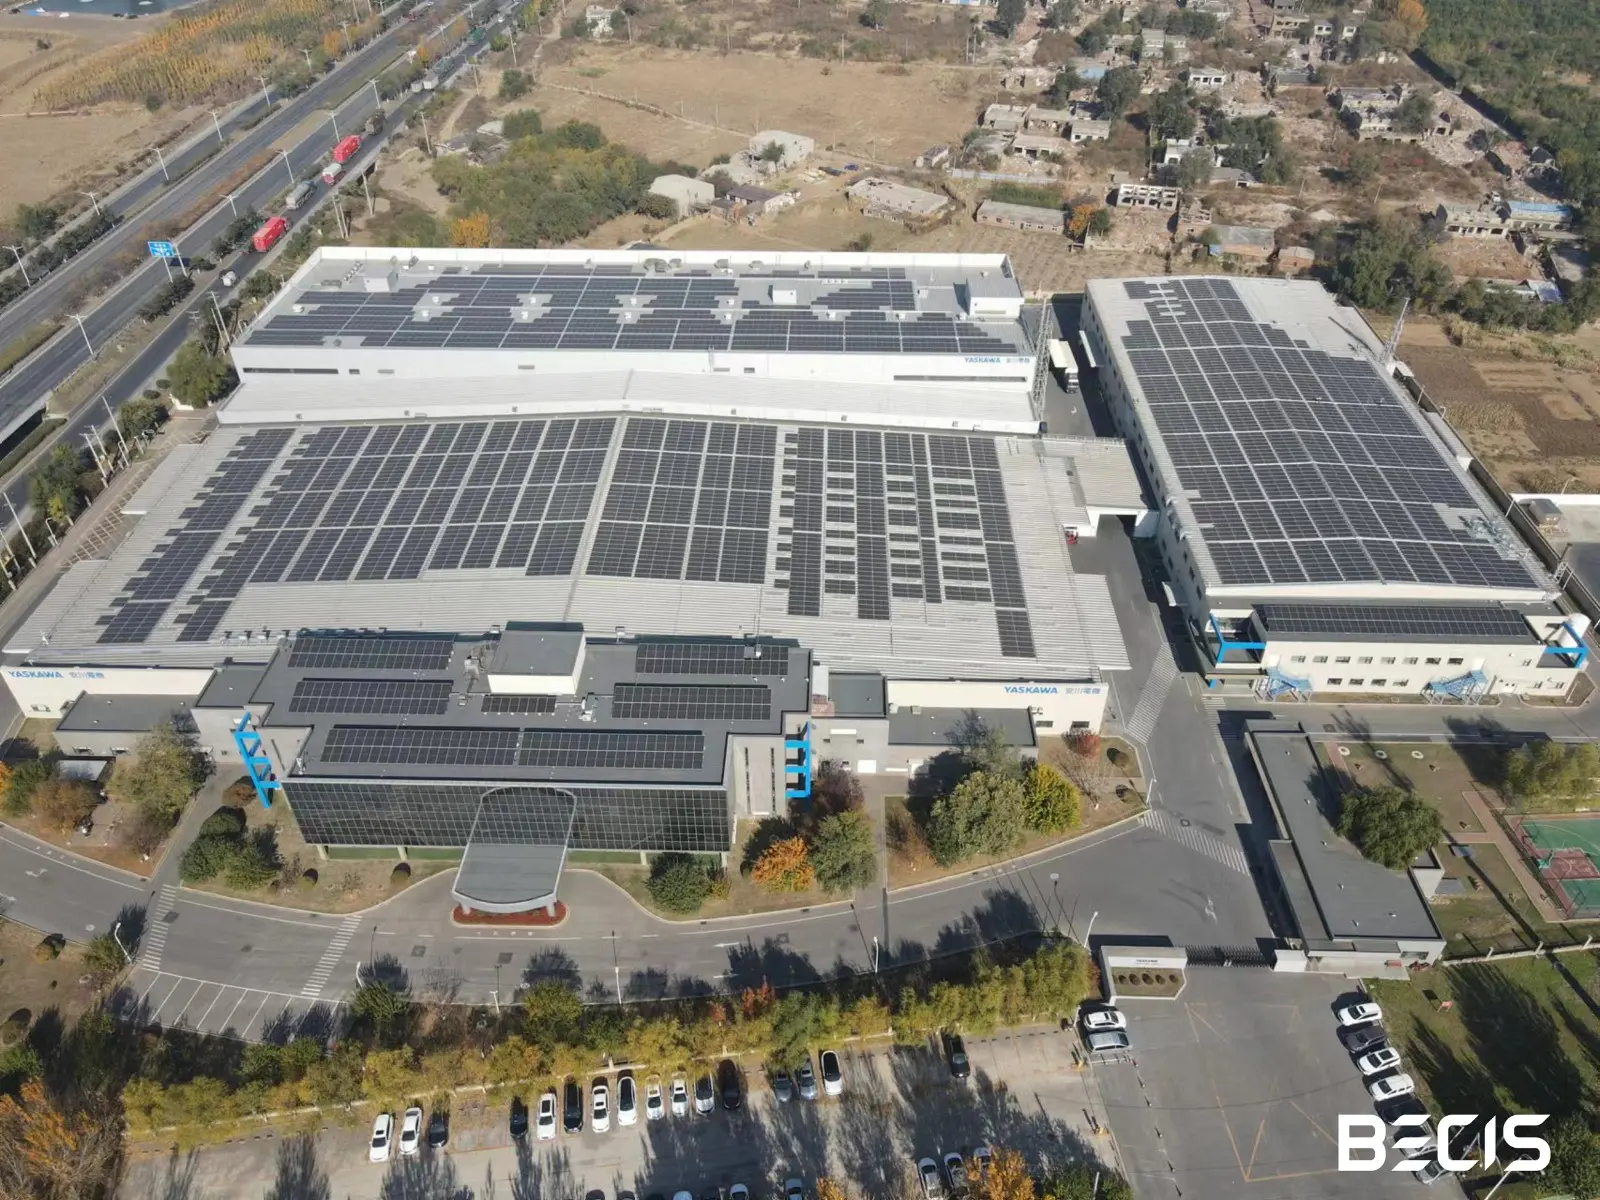 A New Milestone for Green Energy: BECIS China and Yaskawa Electric Unveil a Rooftop Solar Plant